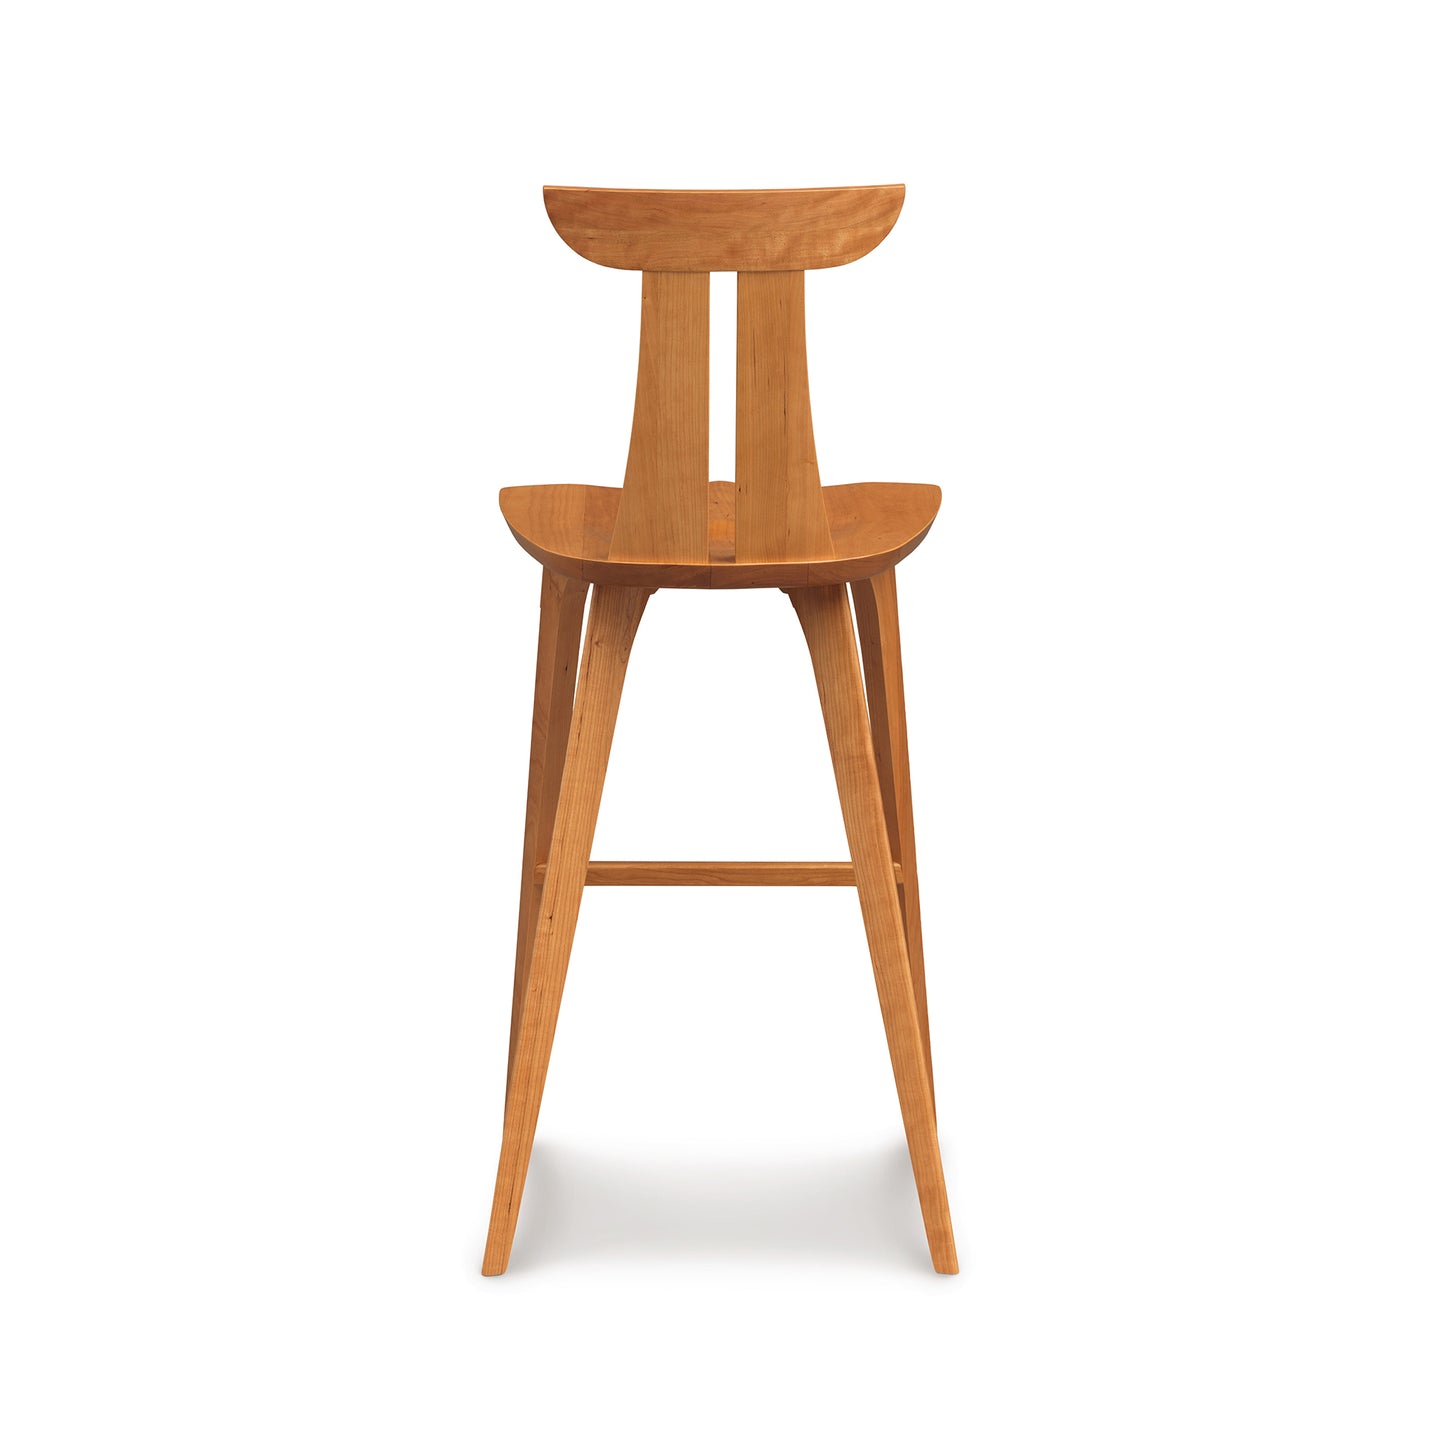 A solid American hardwood Estelle Bar Stool with a curved backrest, displayed against a white background by Copeland Furniture.